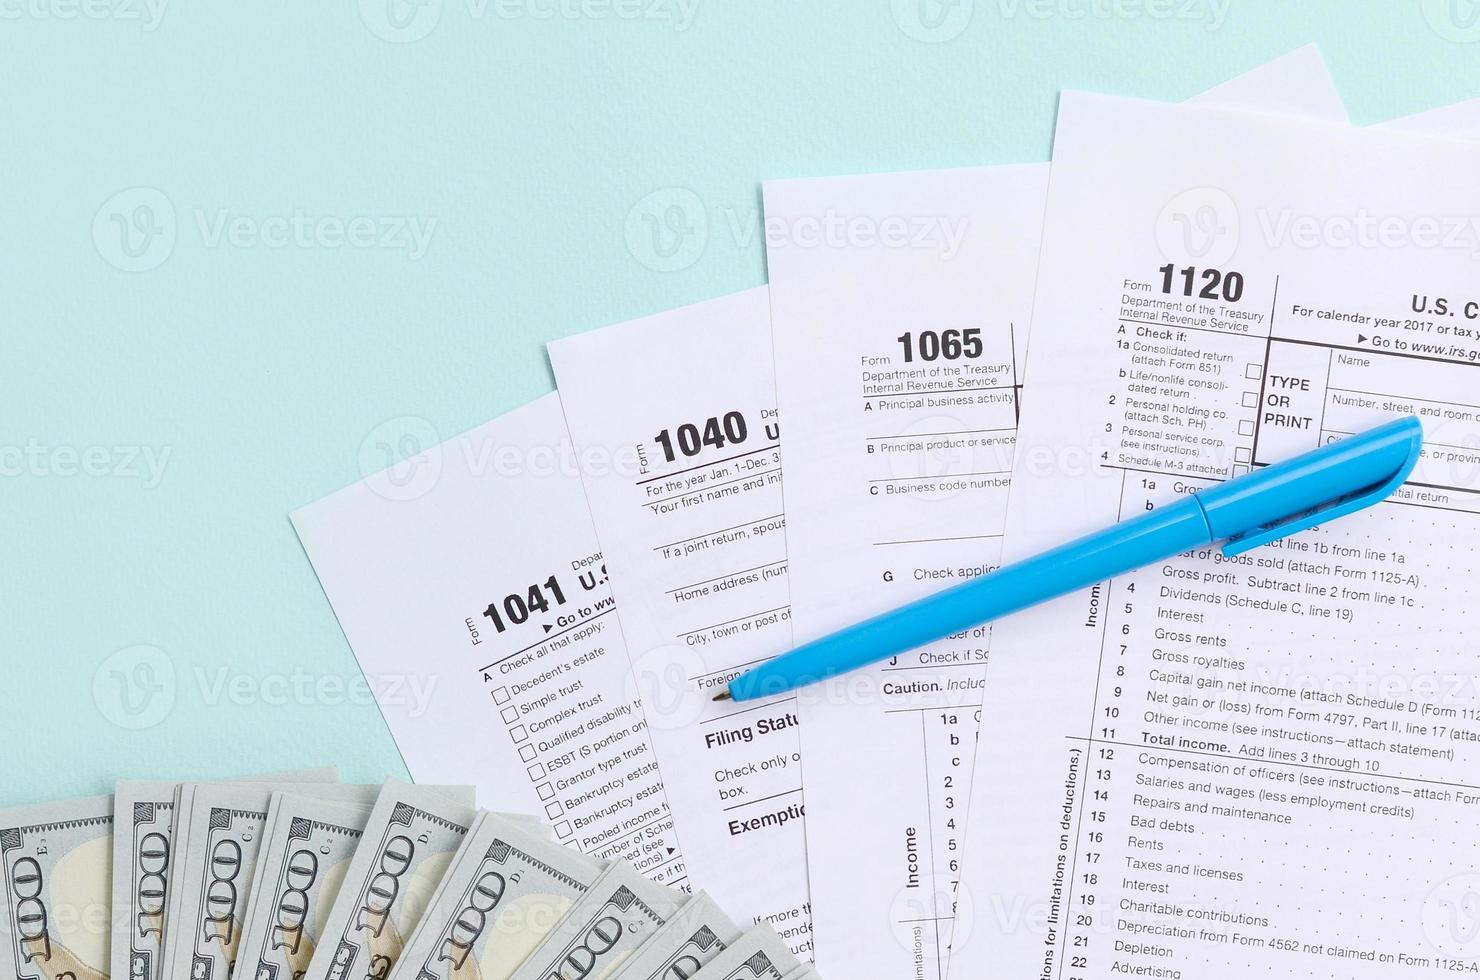 Tax forms lies near hundred dollar bills and blue pen on a light blue background. Income tax return photo